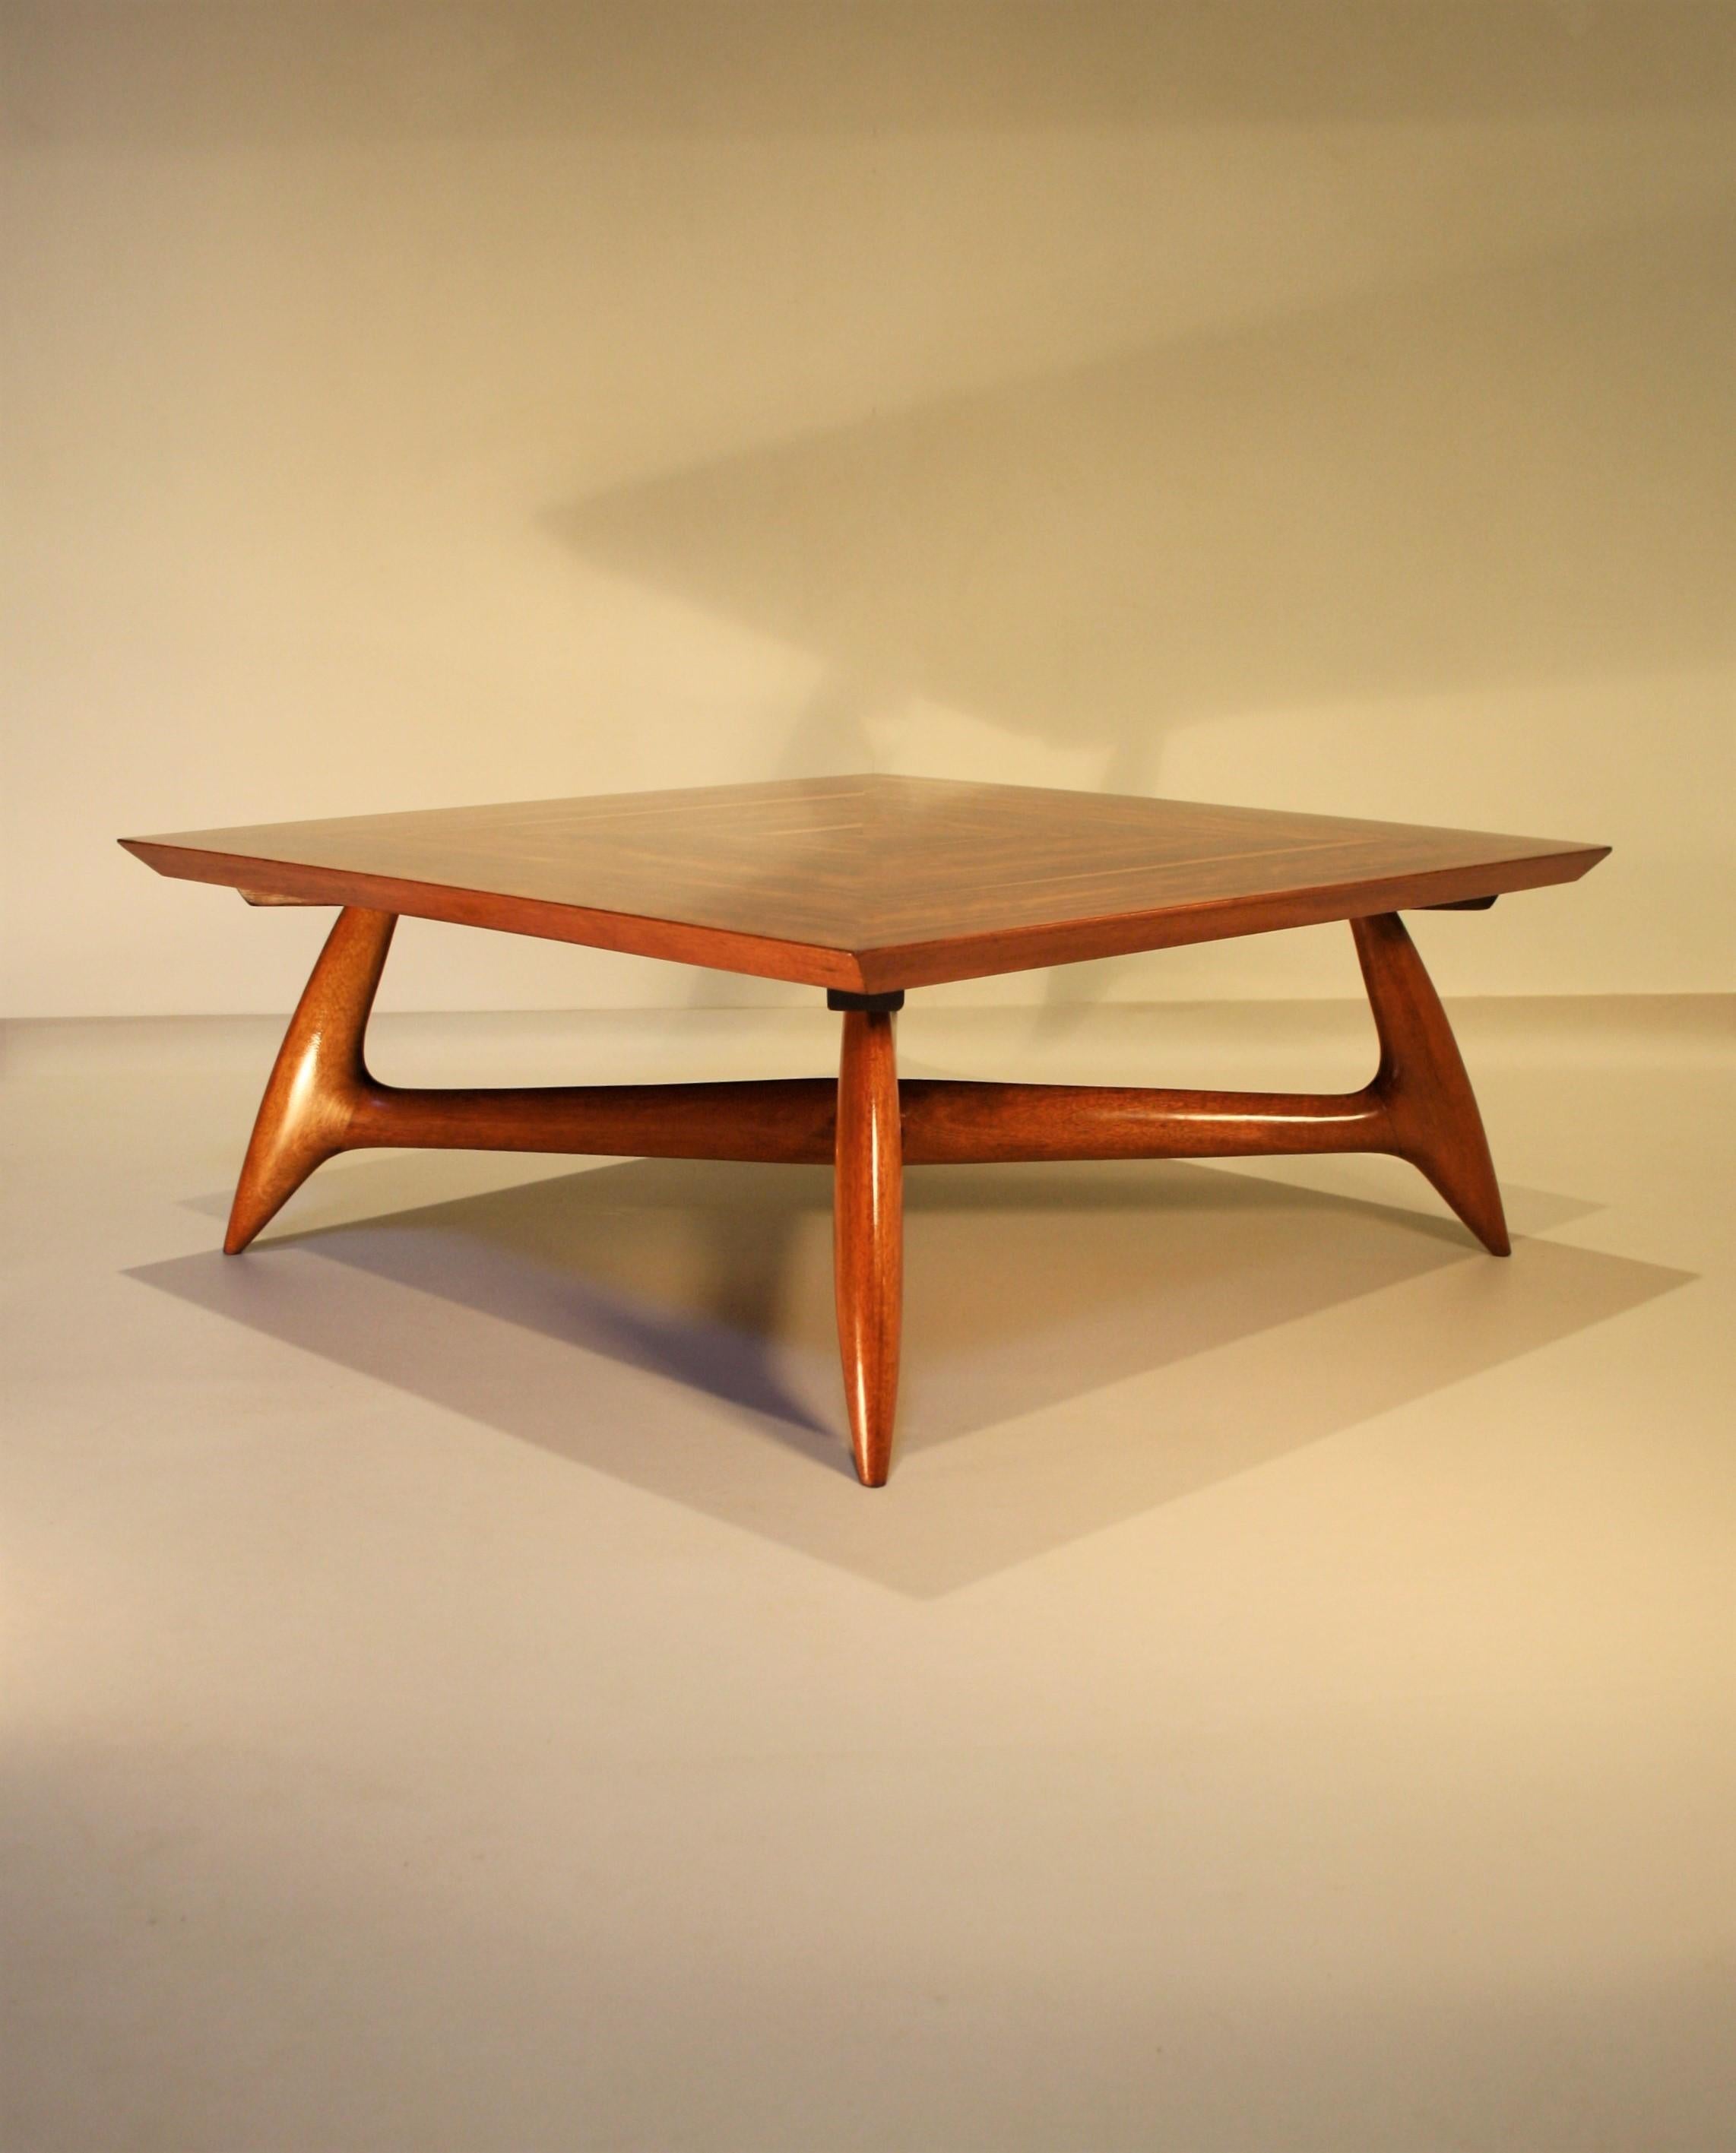 Rare coffee table by Pierluigi Giordani made from walnut, circa 1955.
The square table top has a beautiful veneered walnut inlay of four parts and the biomorphic shaped base is made of solid walnut.
The whole is in very good condition and on photo 8